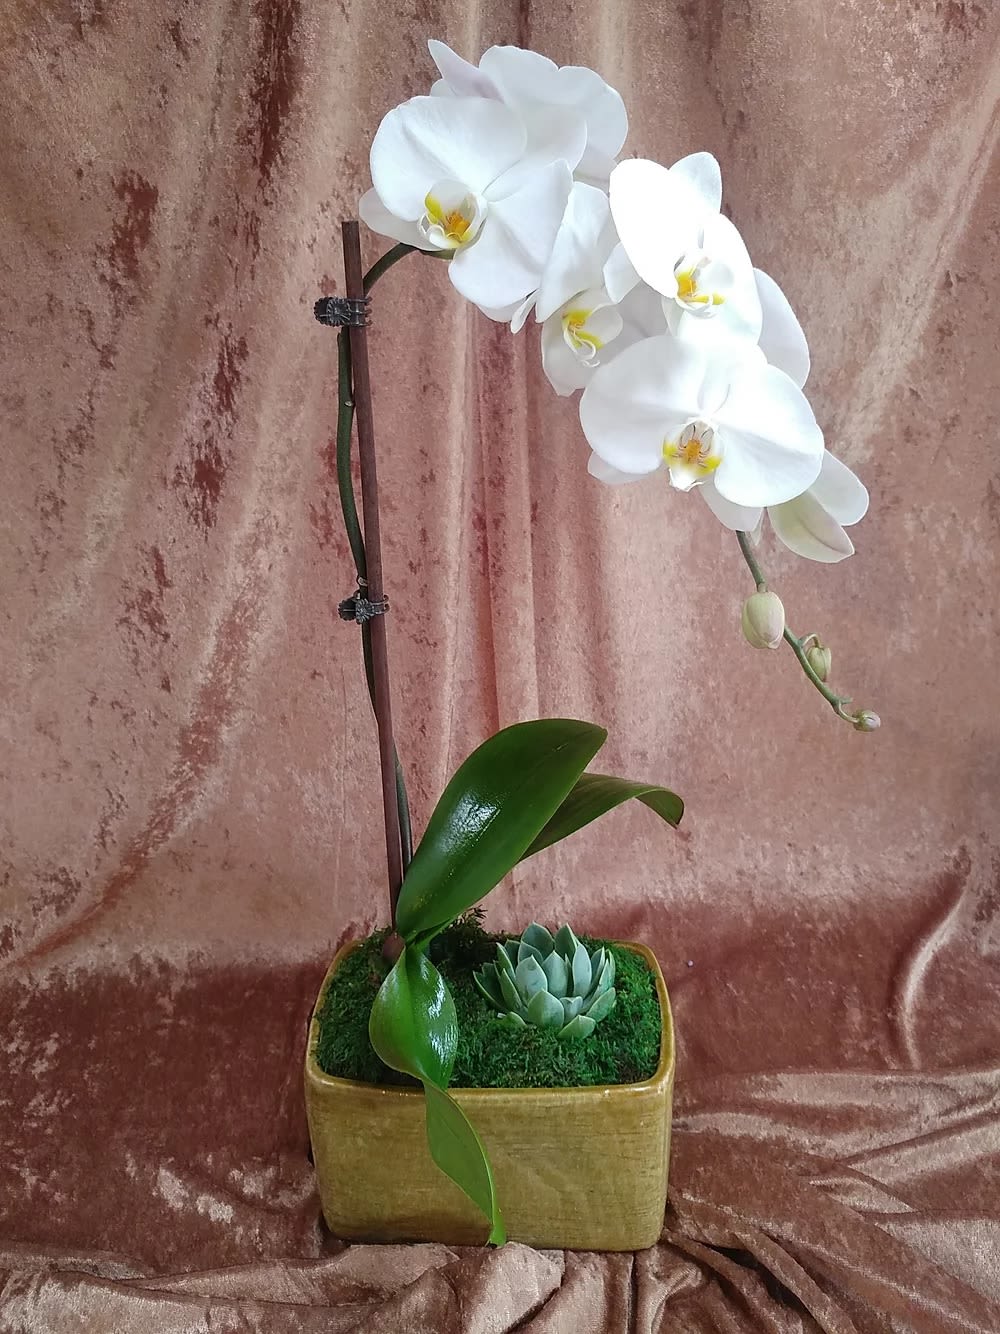 A beautiful and elagant single white GRADE A phaelanopsis orchid with a